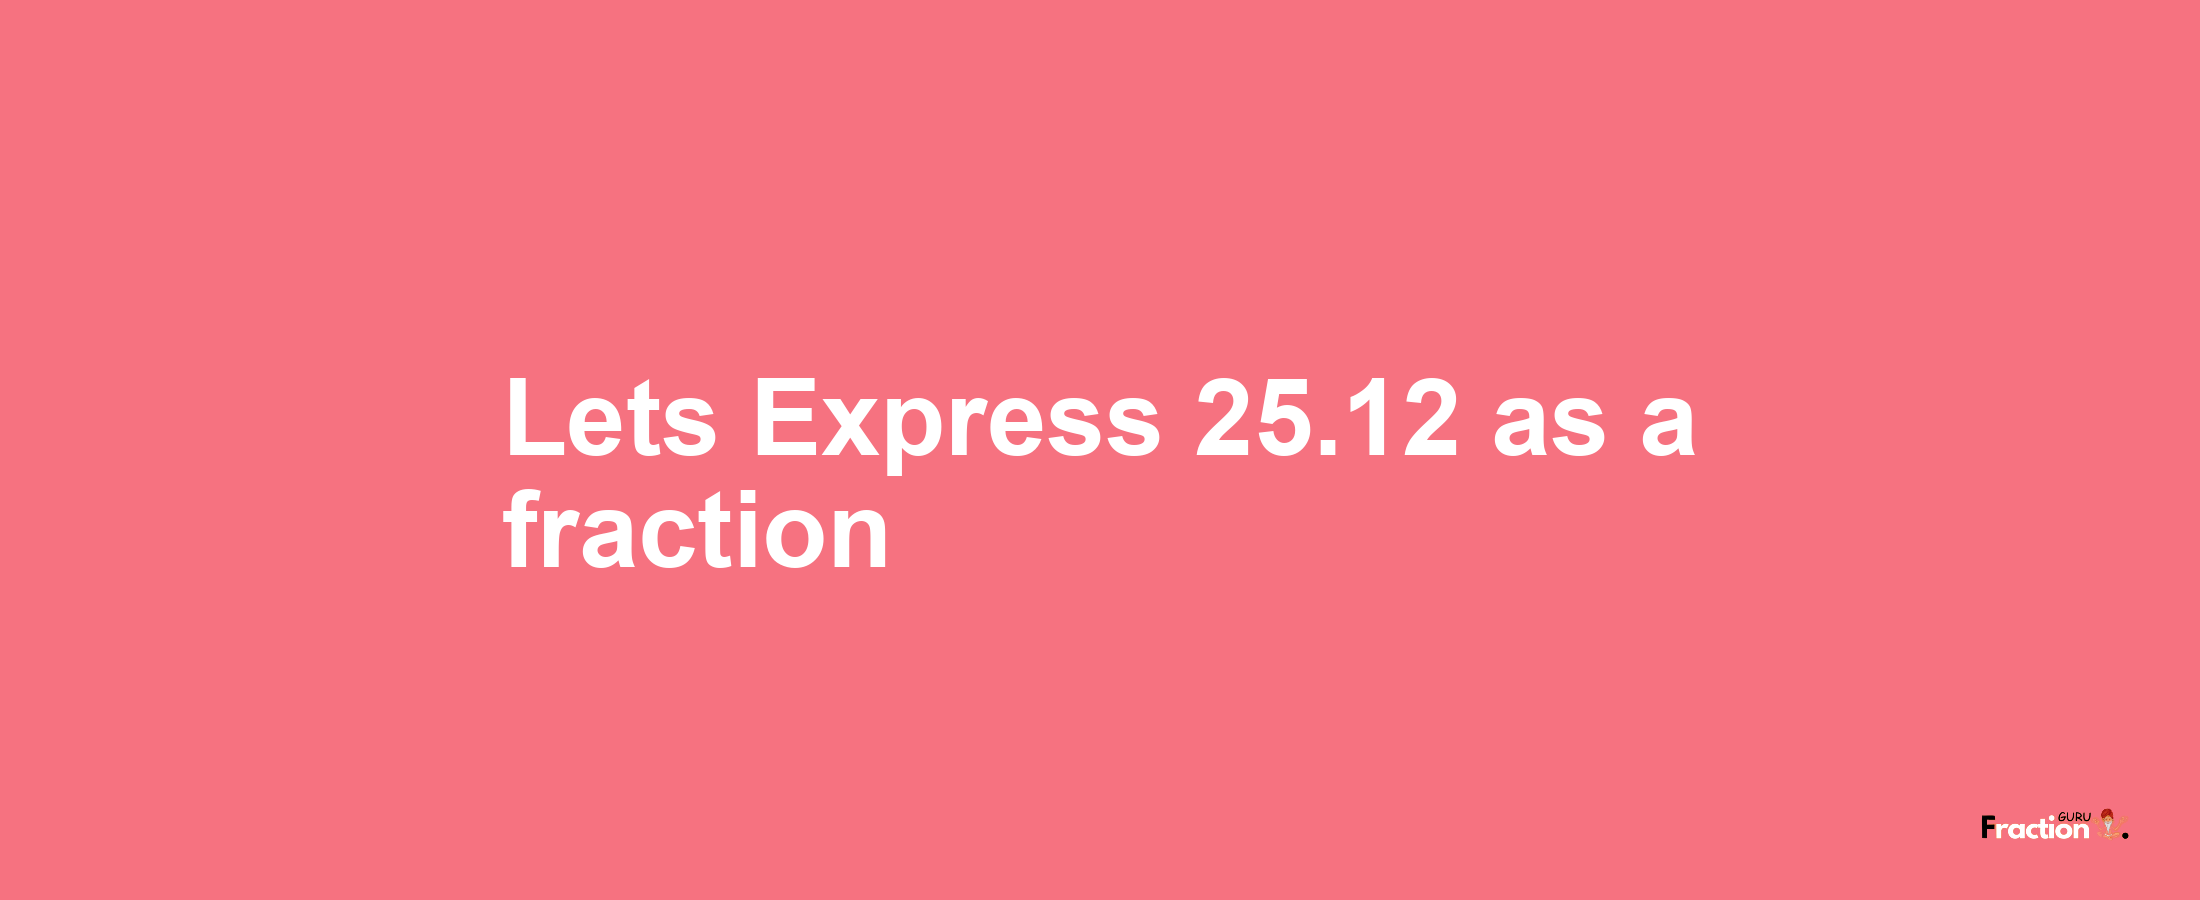 Lets Express 25.12 as afraction